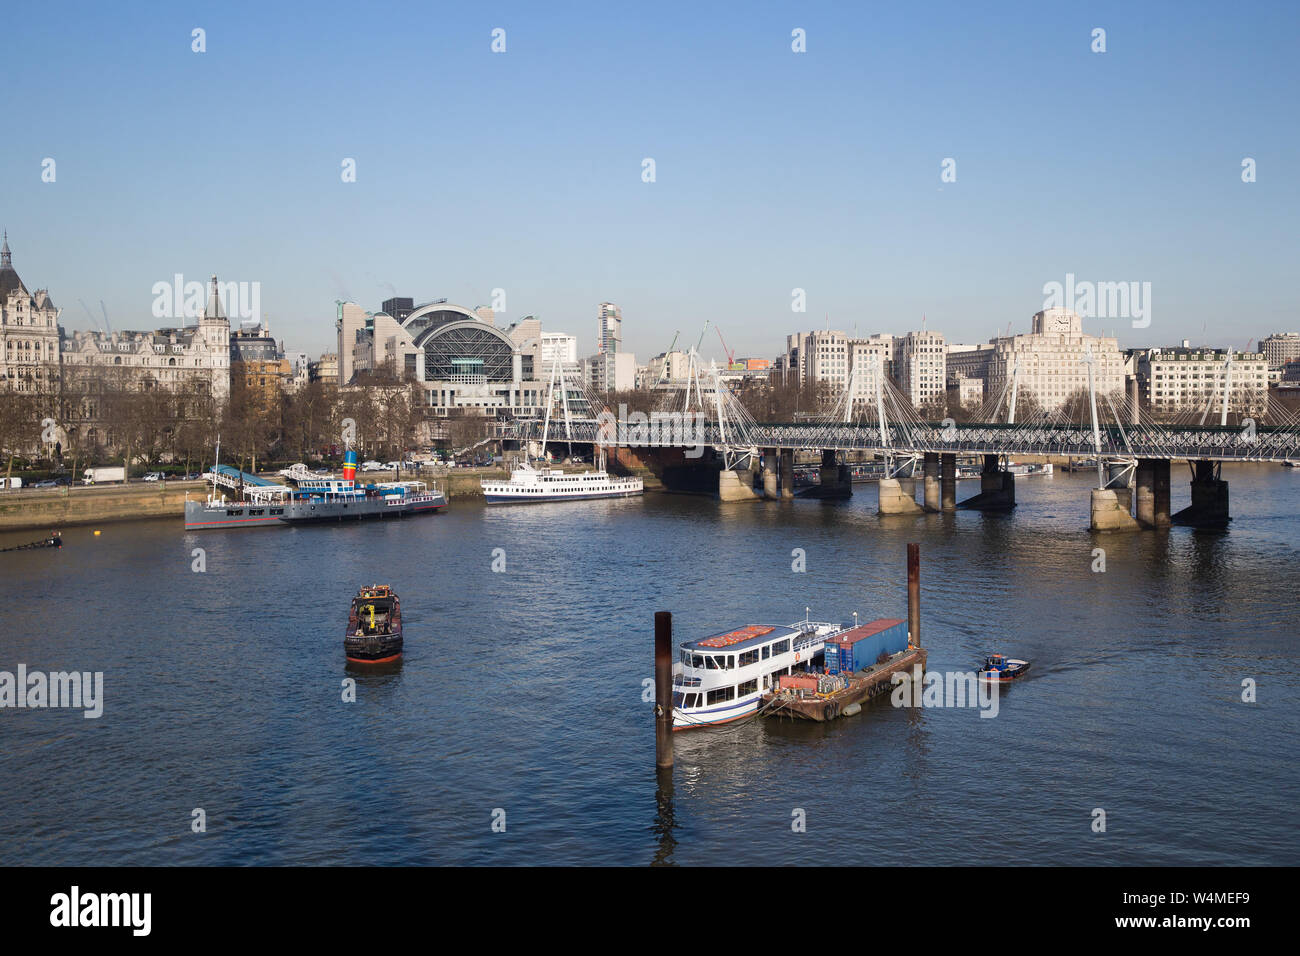 The Northbank, Charing Cross Station, Savoy Hotel and Somerset House, The Thames Stock Photo